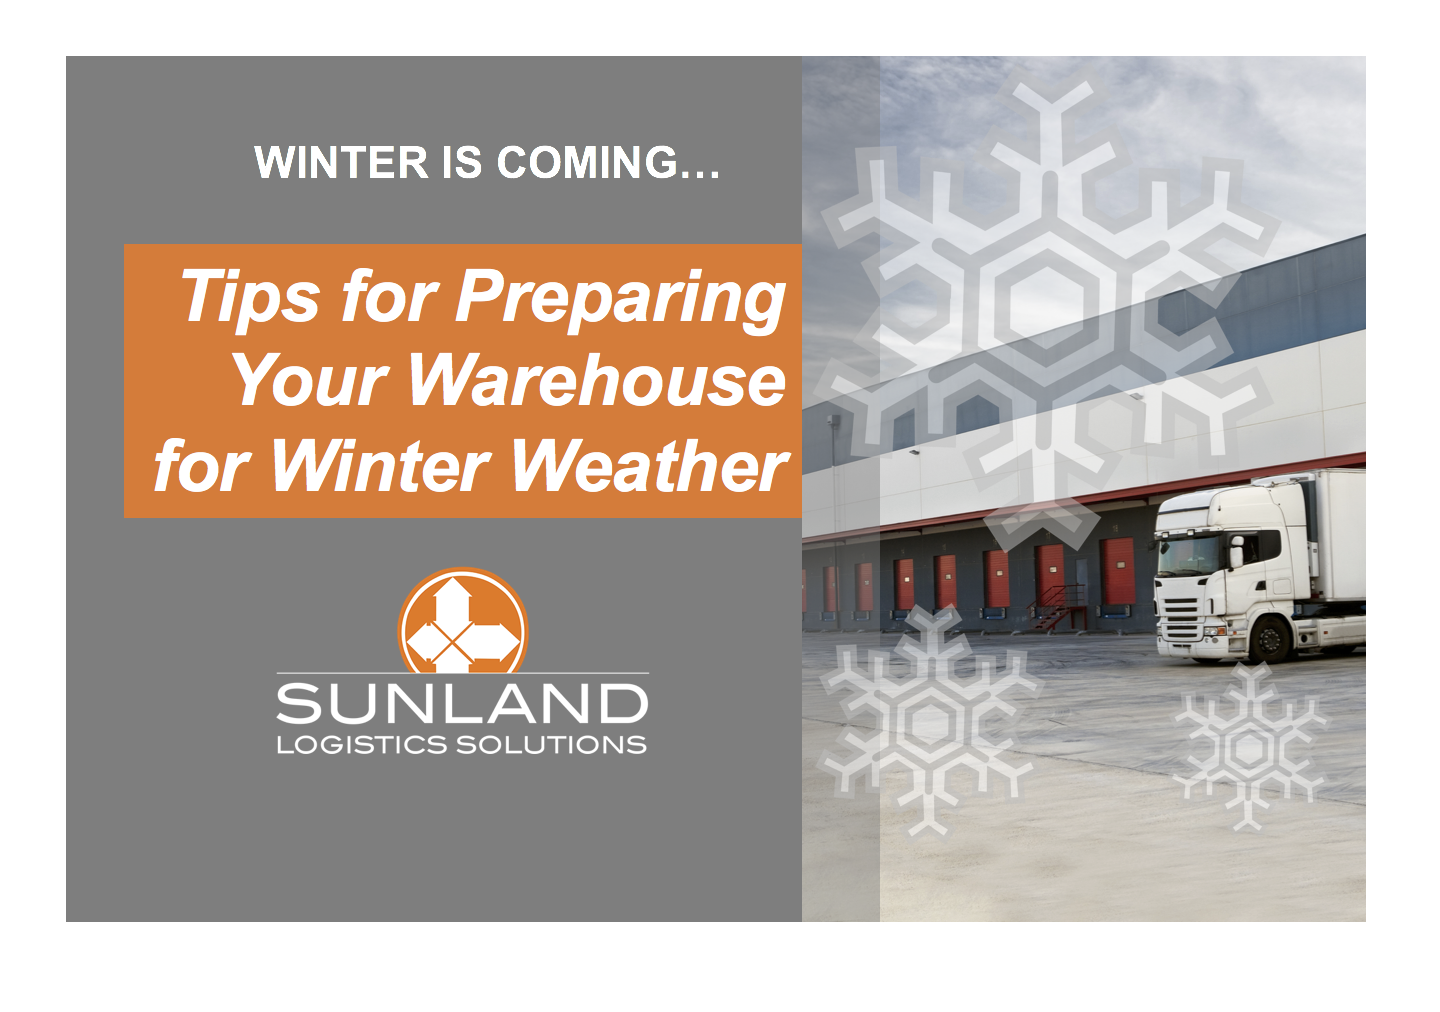 Winter is Coming: Tips for Preparing Your Warehouse for Winter Weather